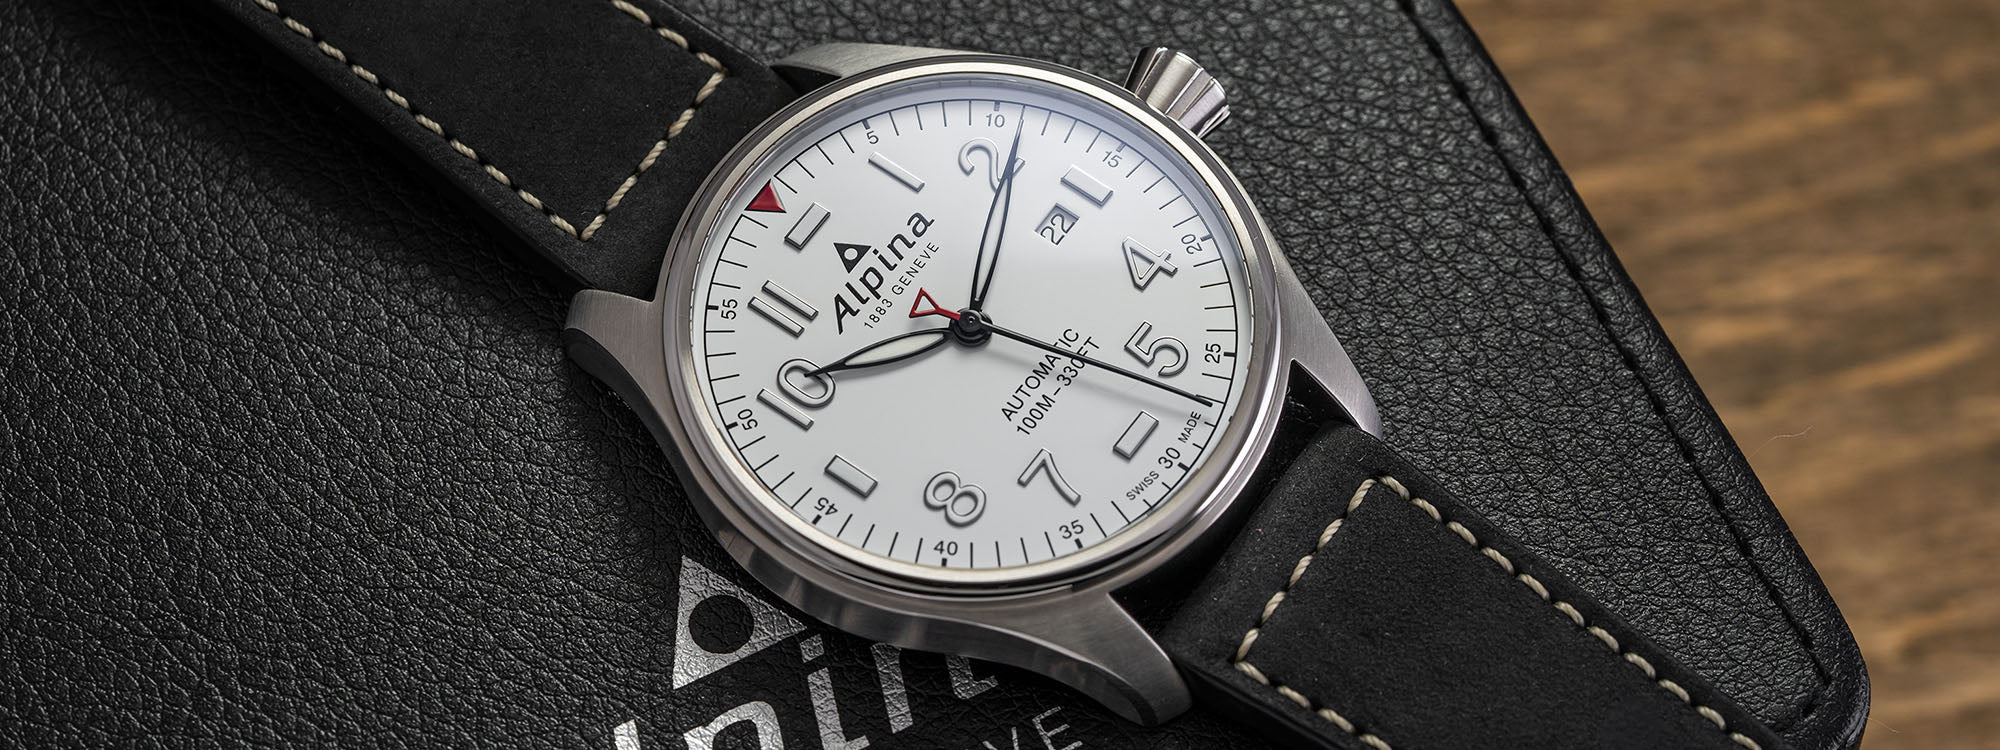 This Longines Is The Best Affordable Pilot's Watch